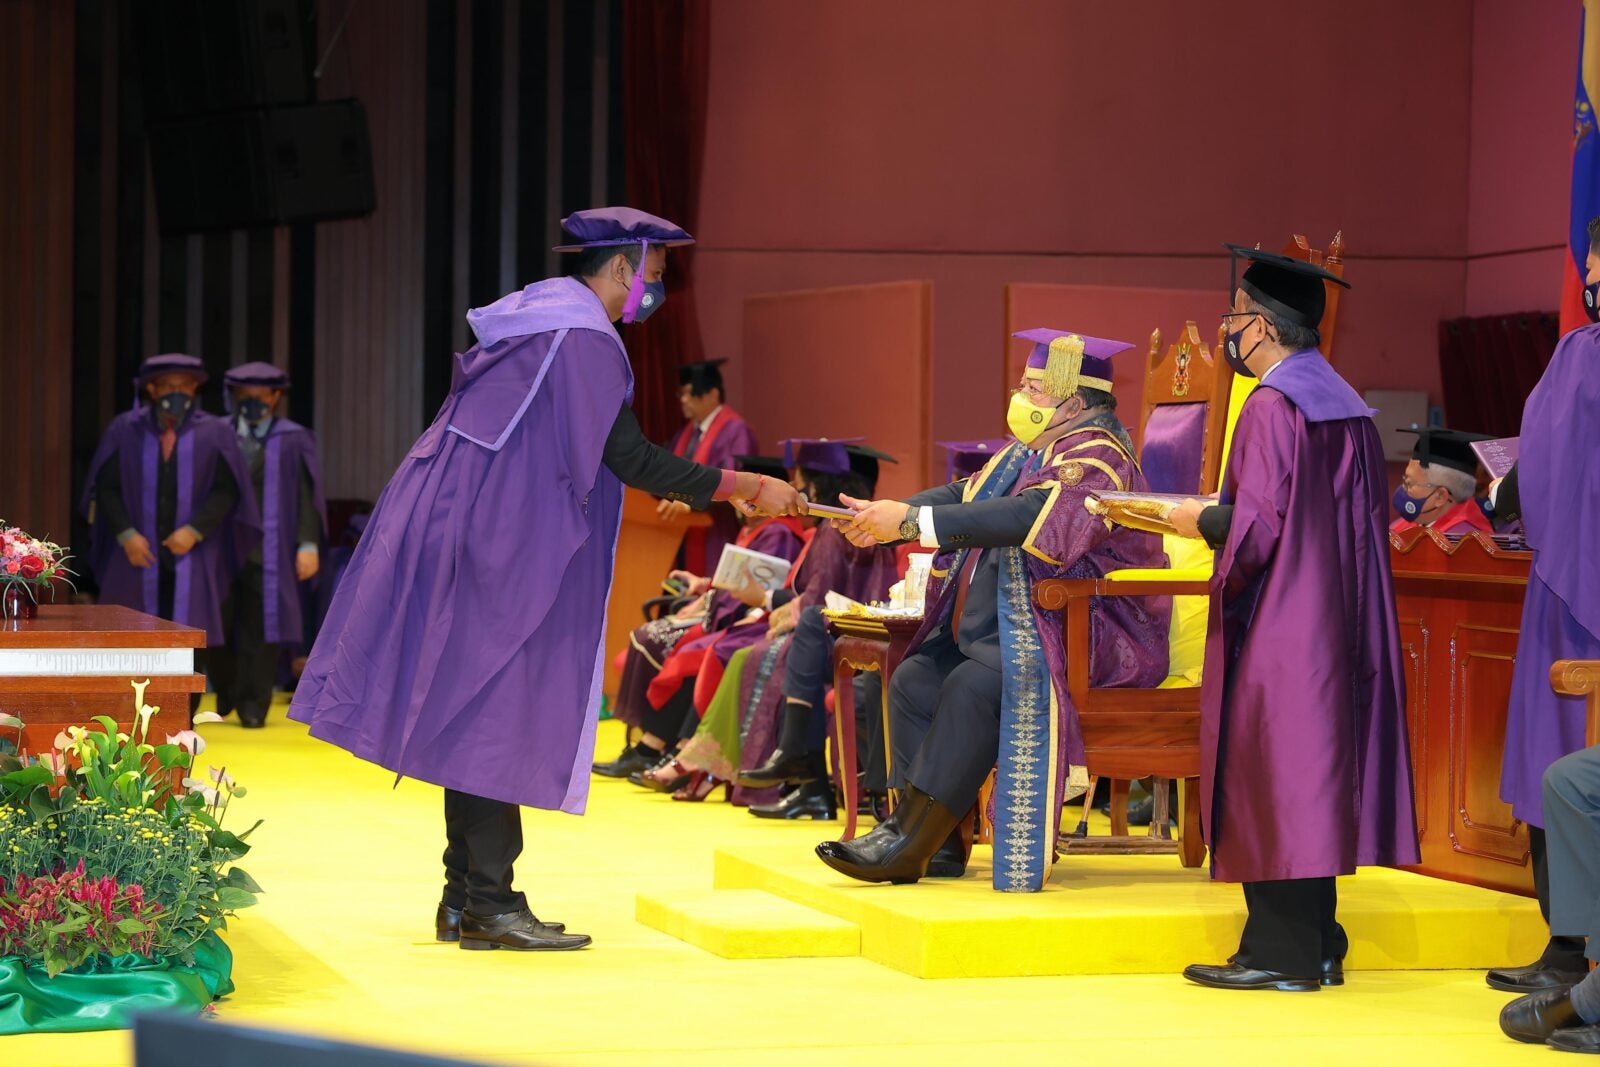 A graduation ceremony for Masters students where a man is being handed his certificate by another man who is sitting.